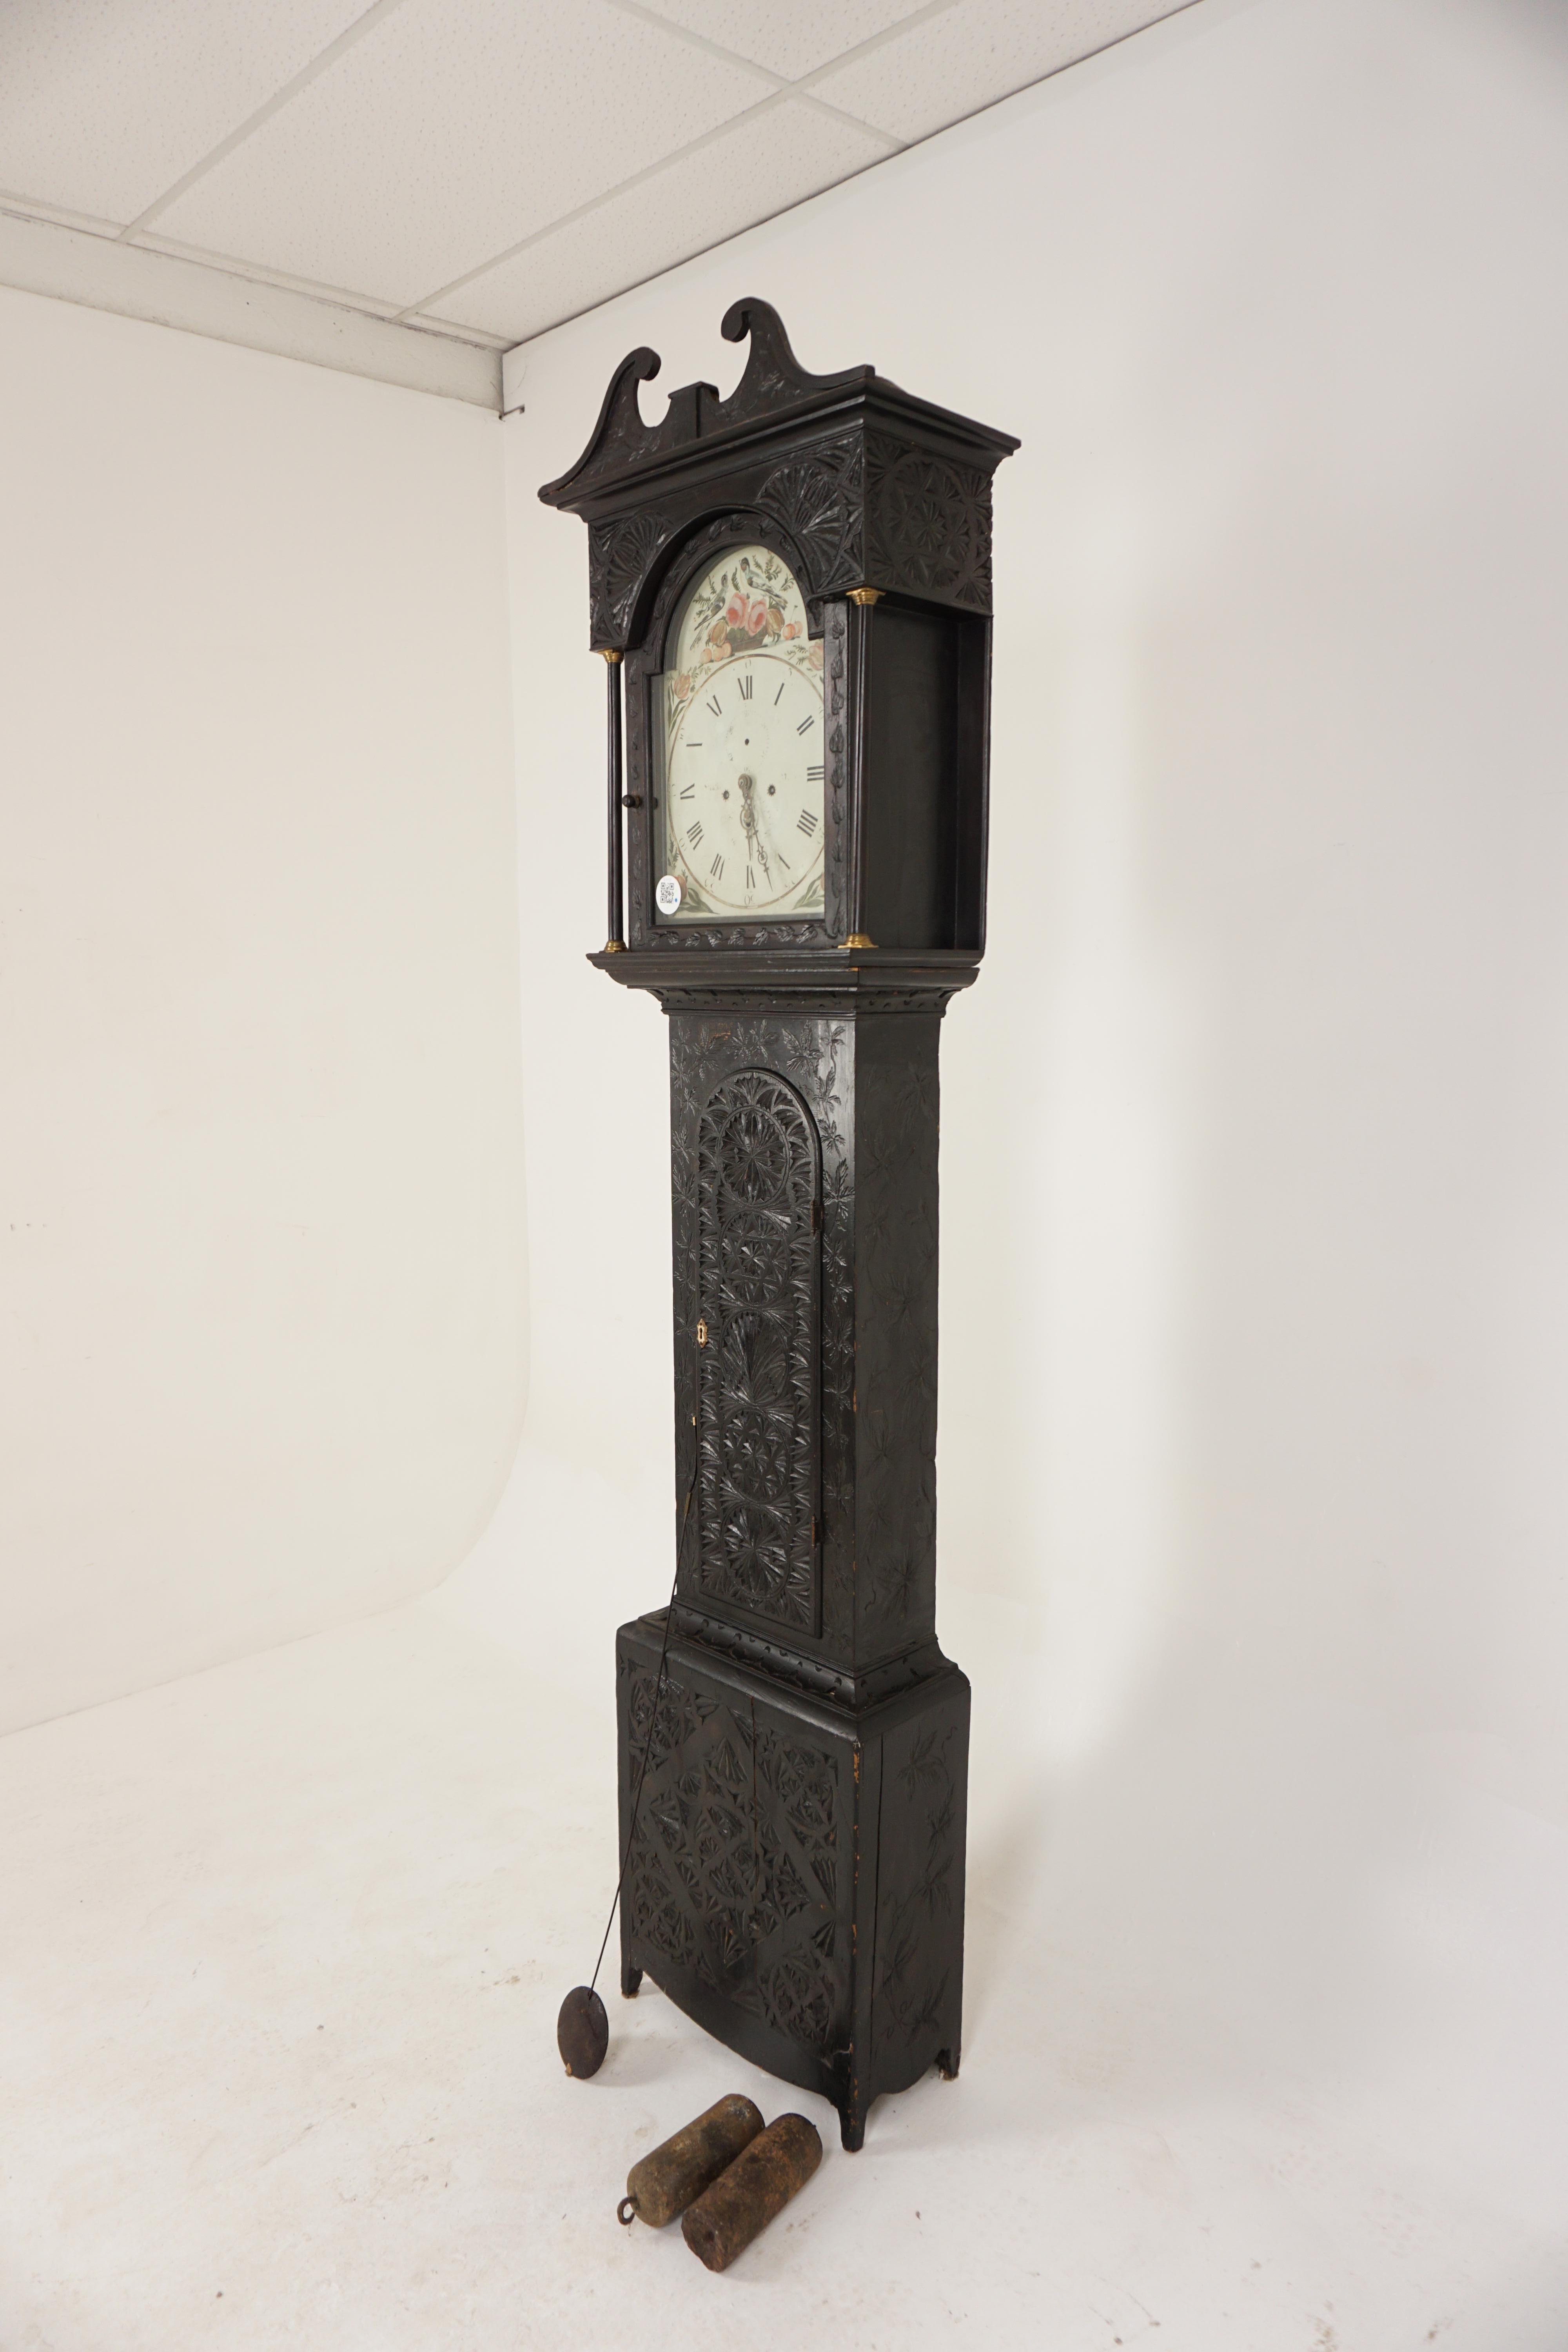 Antique carved Ebonized Pine Grandfather long case clock, Scotland 1880, H372

Scotland 1880
Solid Pine
Original Finish
Swan Neck Top
Heavily carved case on front and sides
Arched painted dial
Carving to the arch shows birds and